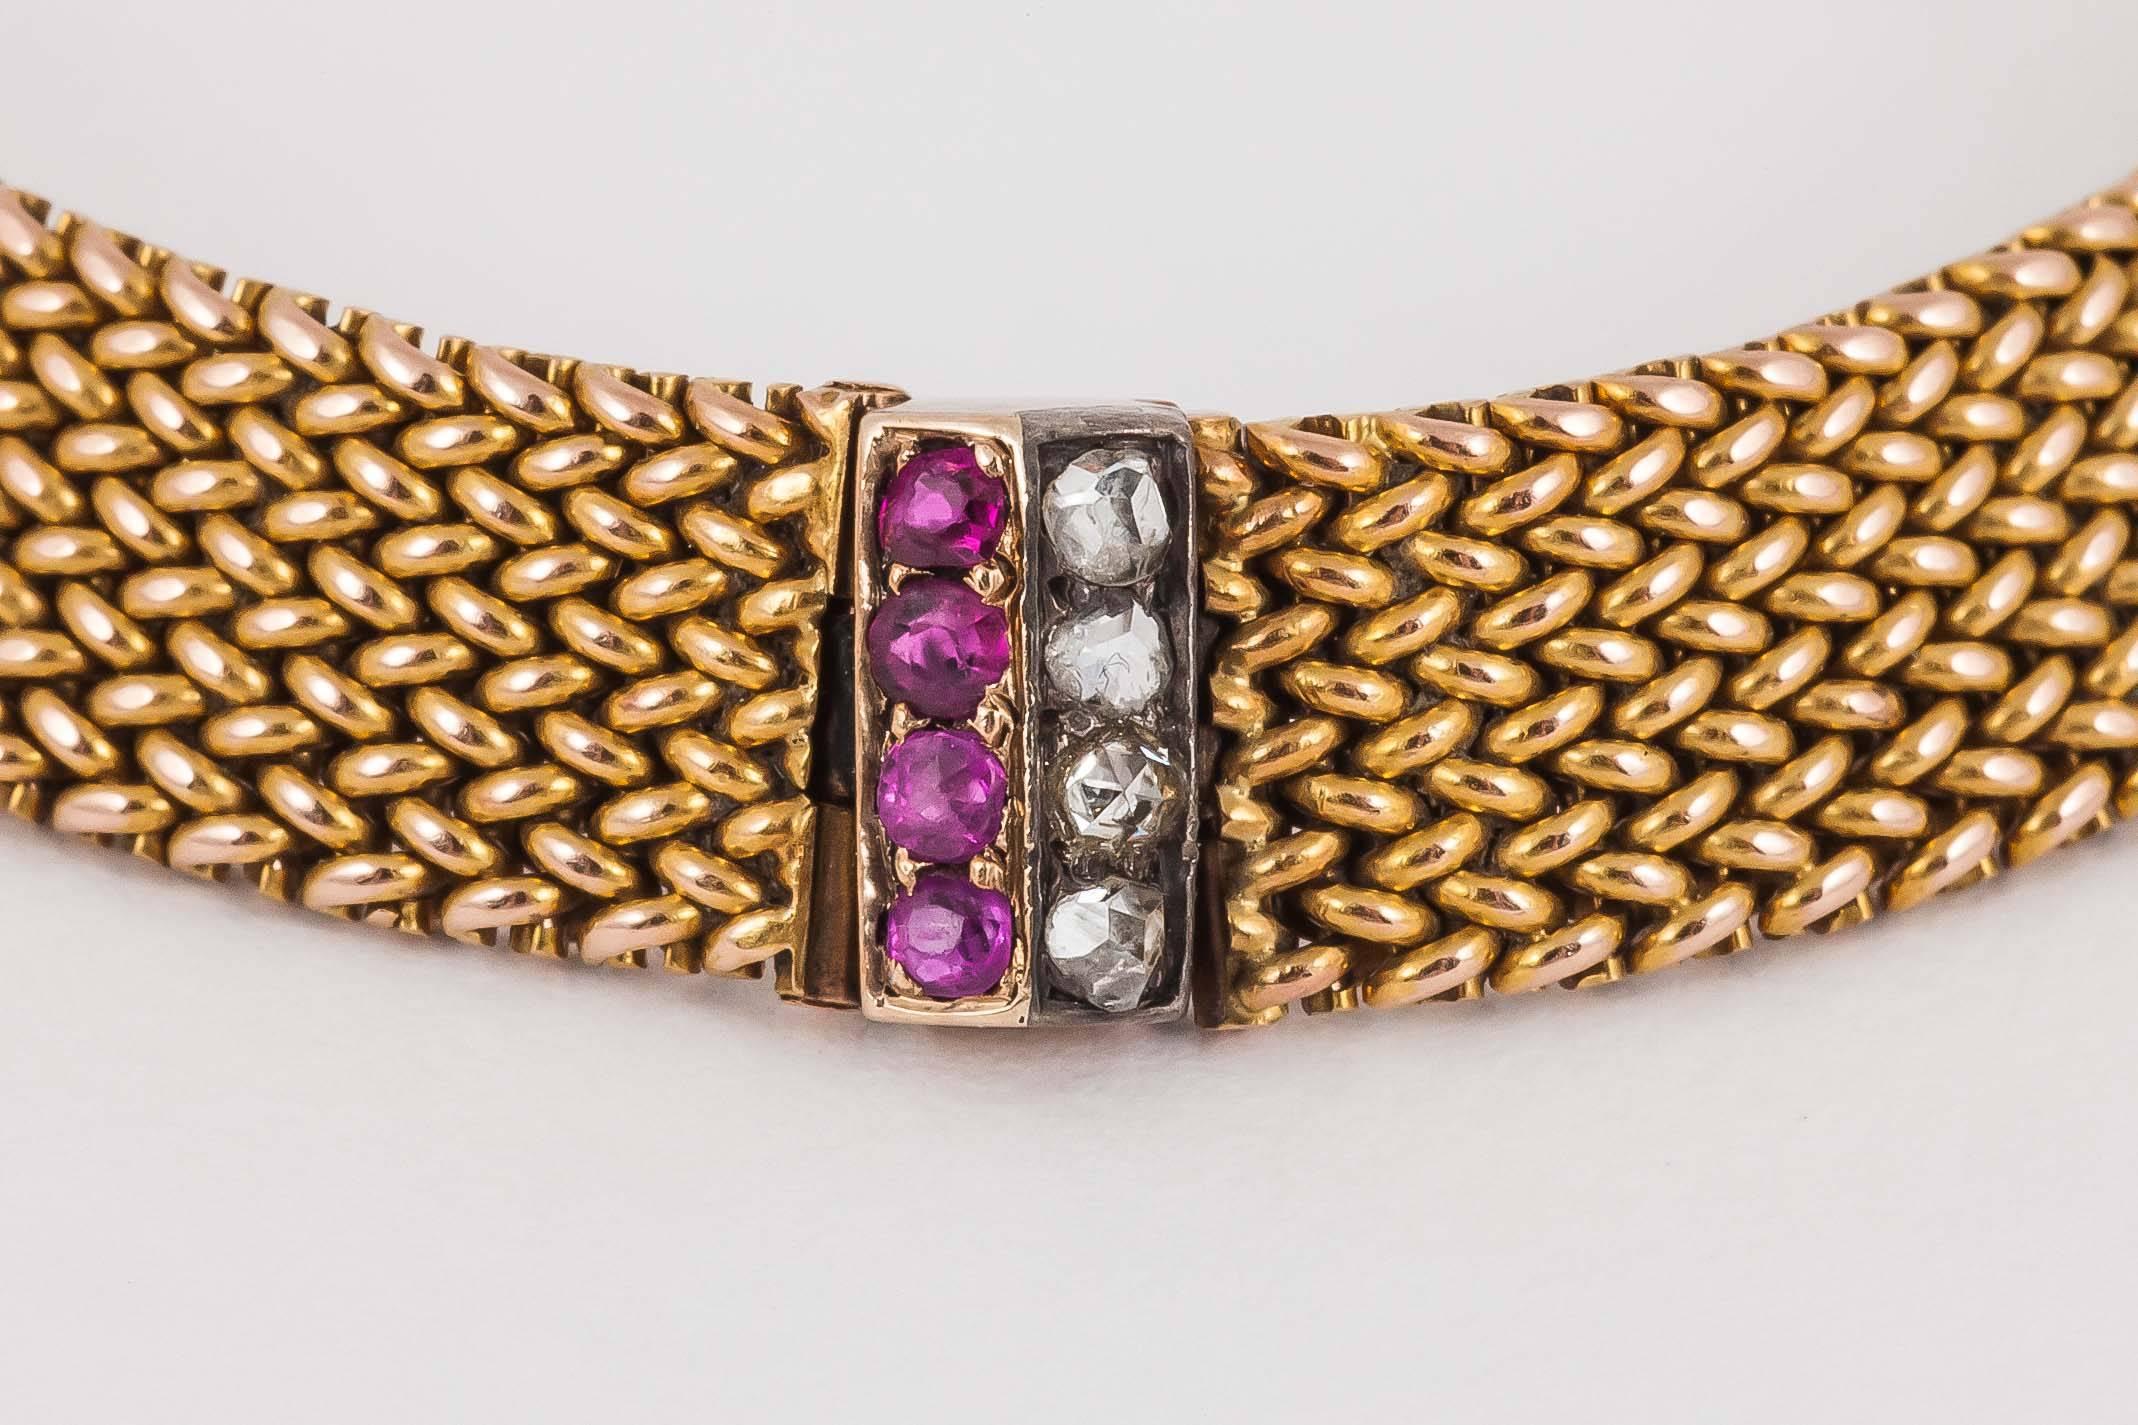 Bracelet in 14 karat yellow gold of mesh design, set with six Burma ruby and rose-cut diamond motifs.
Measures 8mm in width x 195mm in length.
Antique piece (over 100 years old).
Early 20th century, Austrian circa 1900-10.

Stock no. 1588